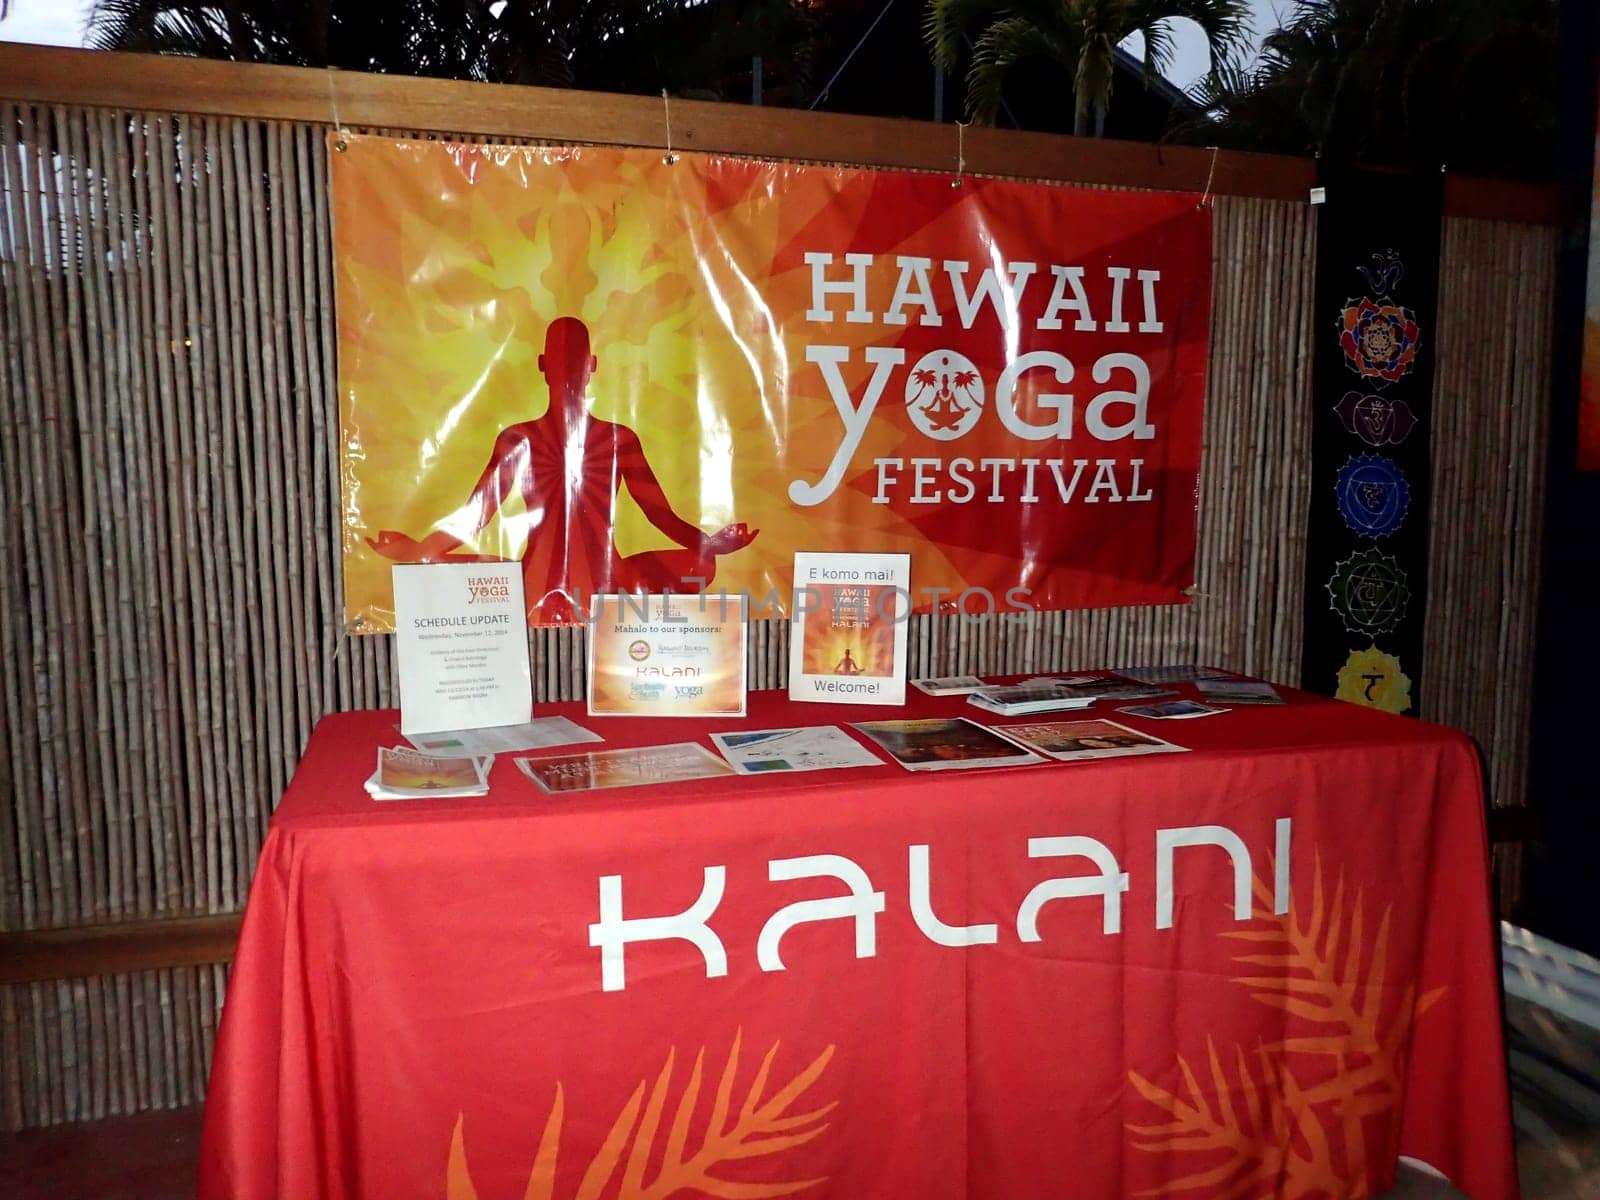 Hawaii - November 12, 2014:  banner for the Hawaii Yoga Festival, hanging on a bamboo fence at the Kalani Retreat Center in Pahoa, Hawaii. The banner is orange and yellow with a silhouette of a person in a yoga pose and the text "Hawaii Yoga Festival" in white. Below the banner is a table with a red tablecloth and various brochures and flyers, including one with the sign "Kalani" in white. The background consists of palm trees and other tropical foliage, creating a natural and serene atmosphere.